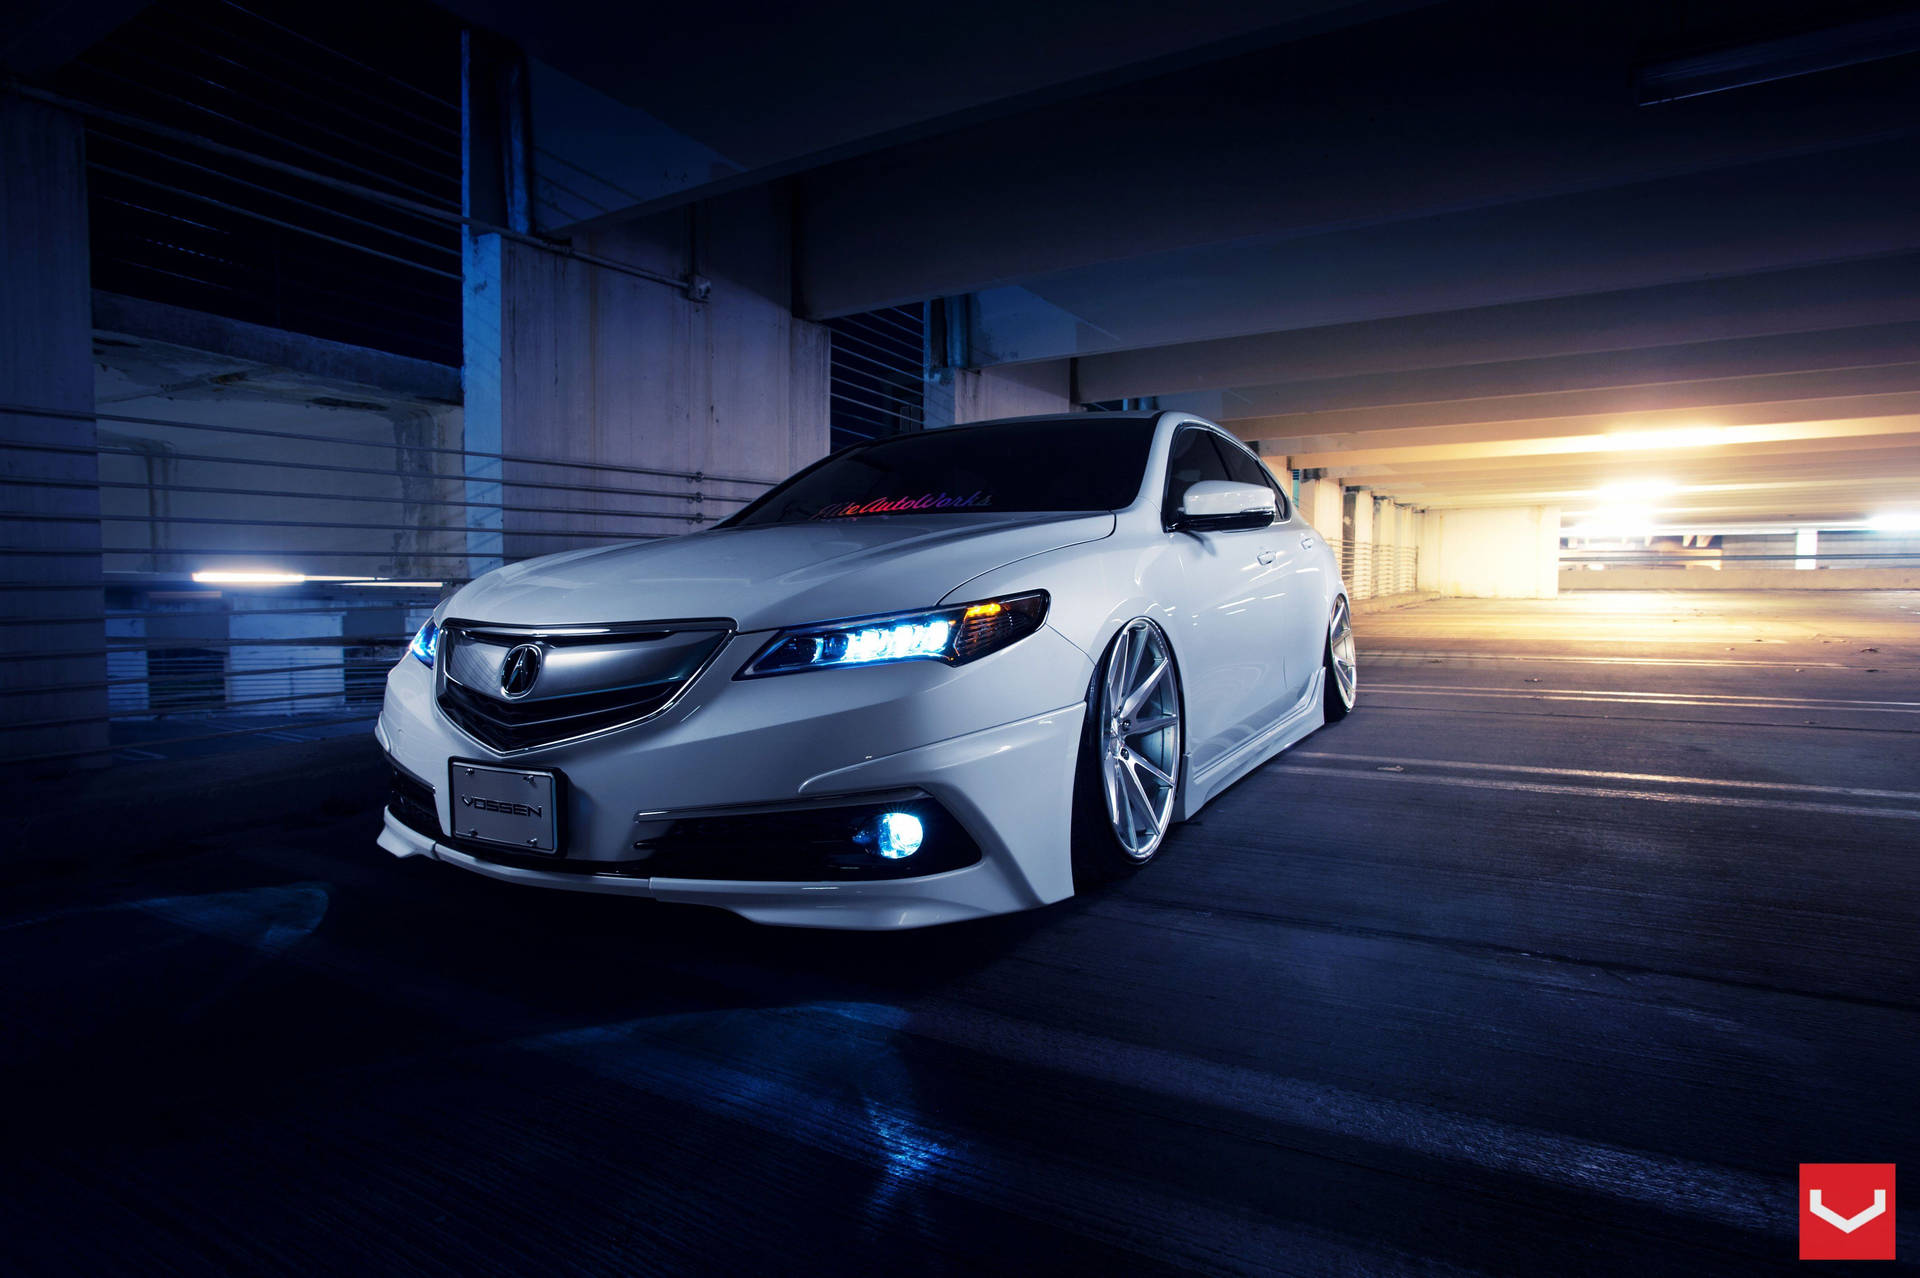 Free Acura Background Photos, [100+] Acura Background for FREE | Wallpapers .com